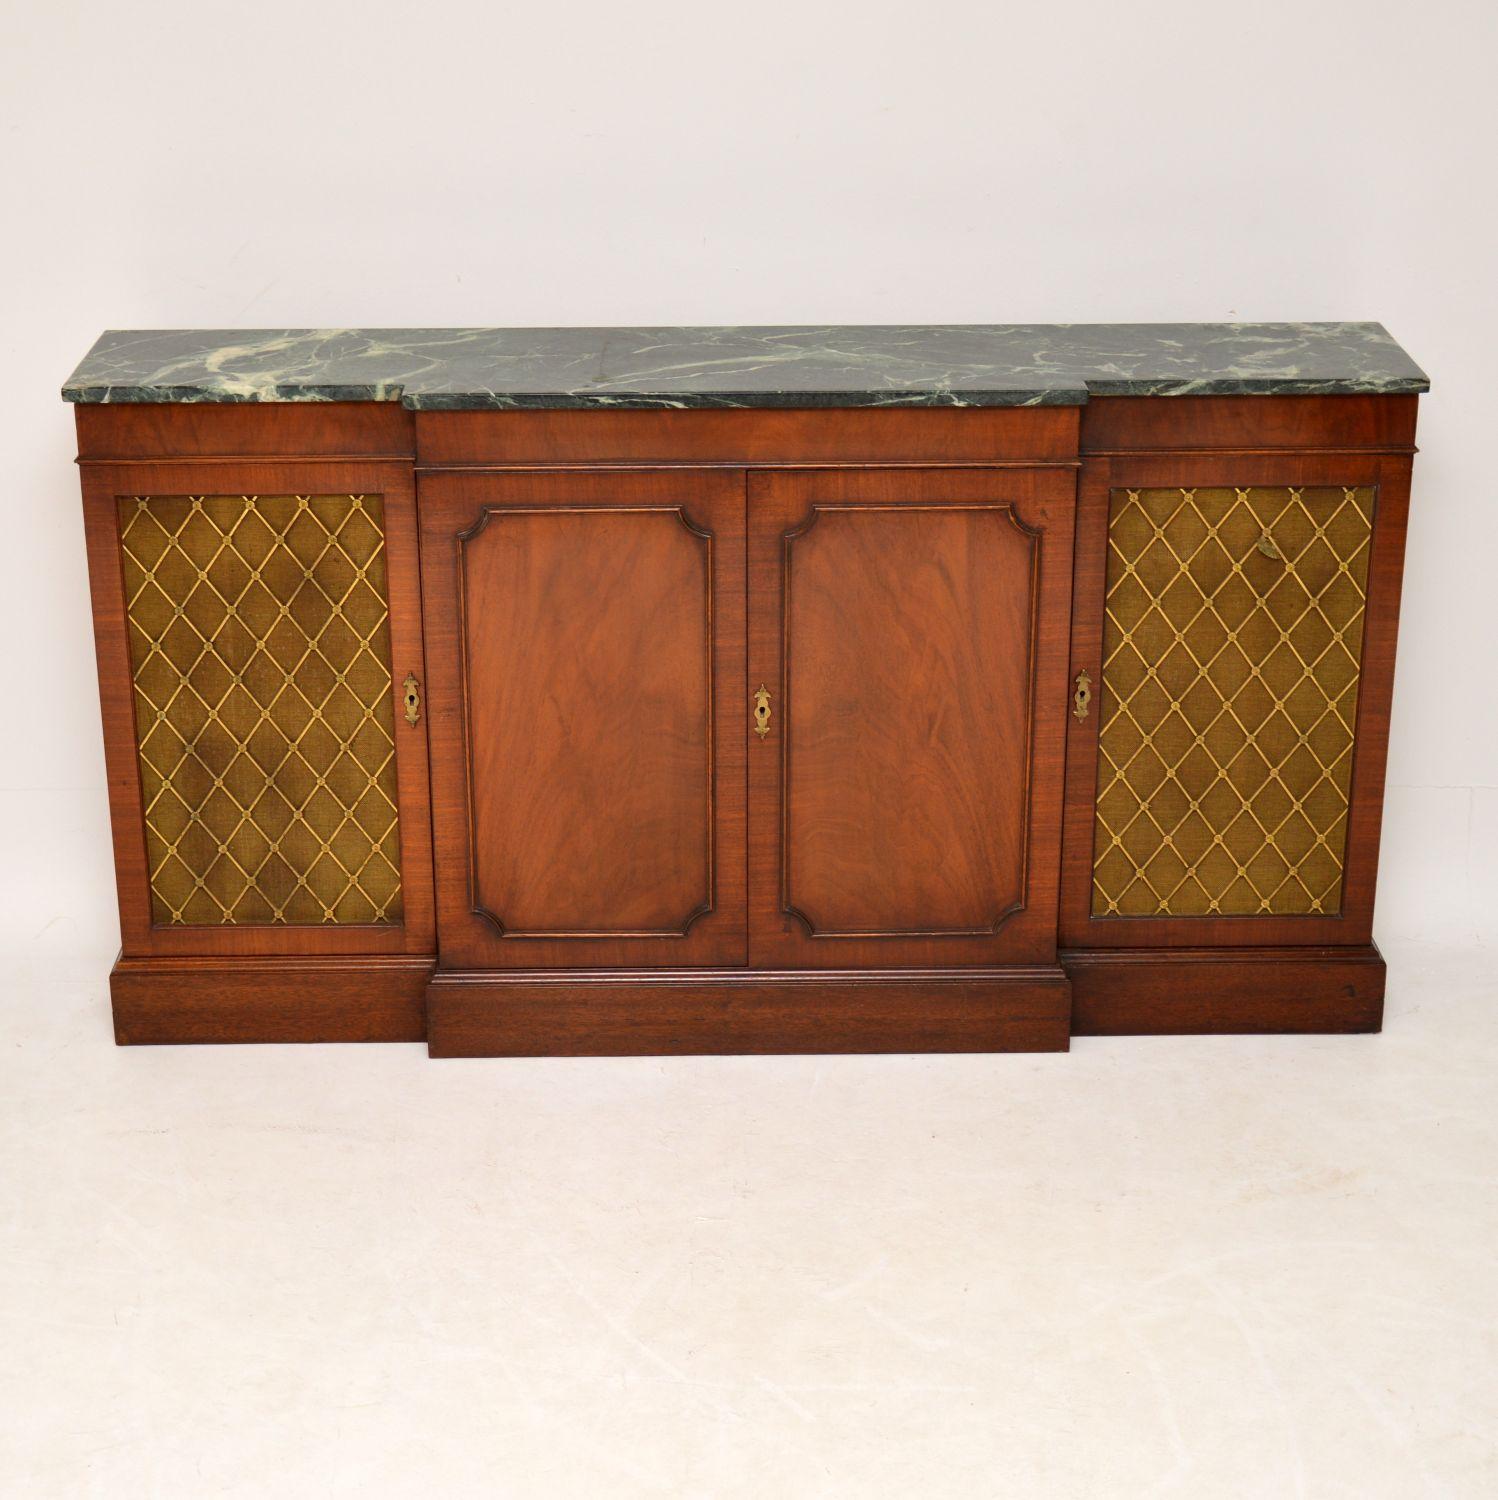 Very practicable sideboard which is long and slim from back to front and with lots of storage inside. It’s antique Regency style, dating roughly from the 1950s period and in good original condition, having just been French polished. The marble top